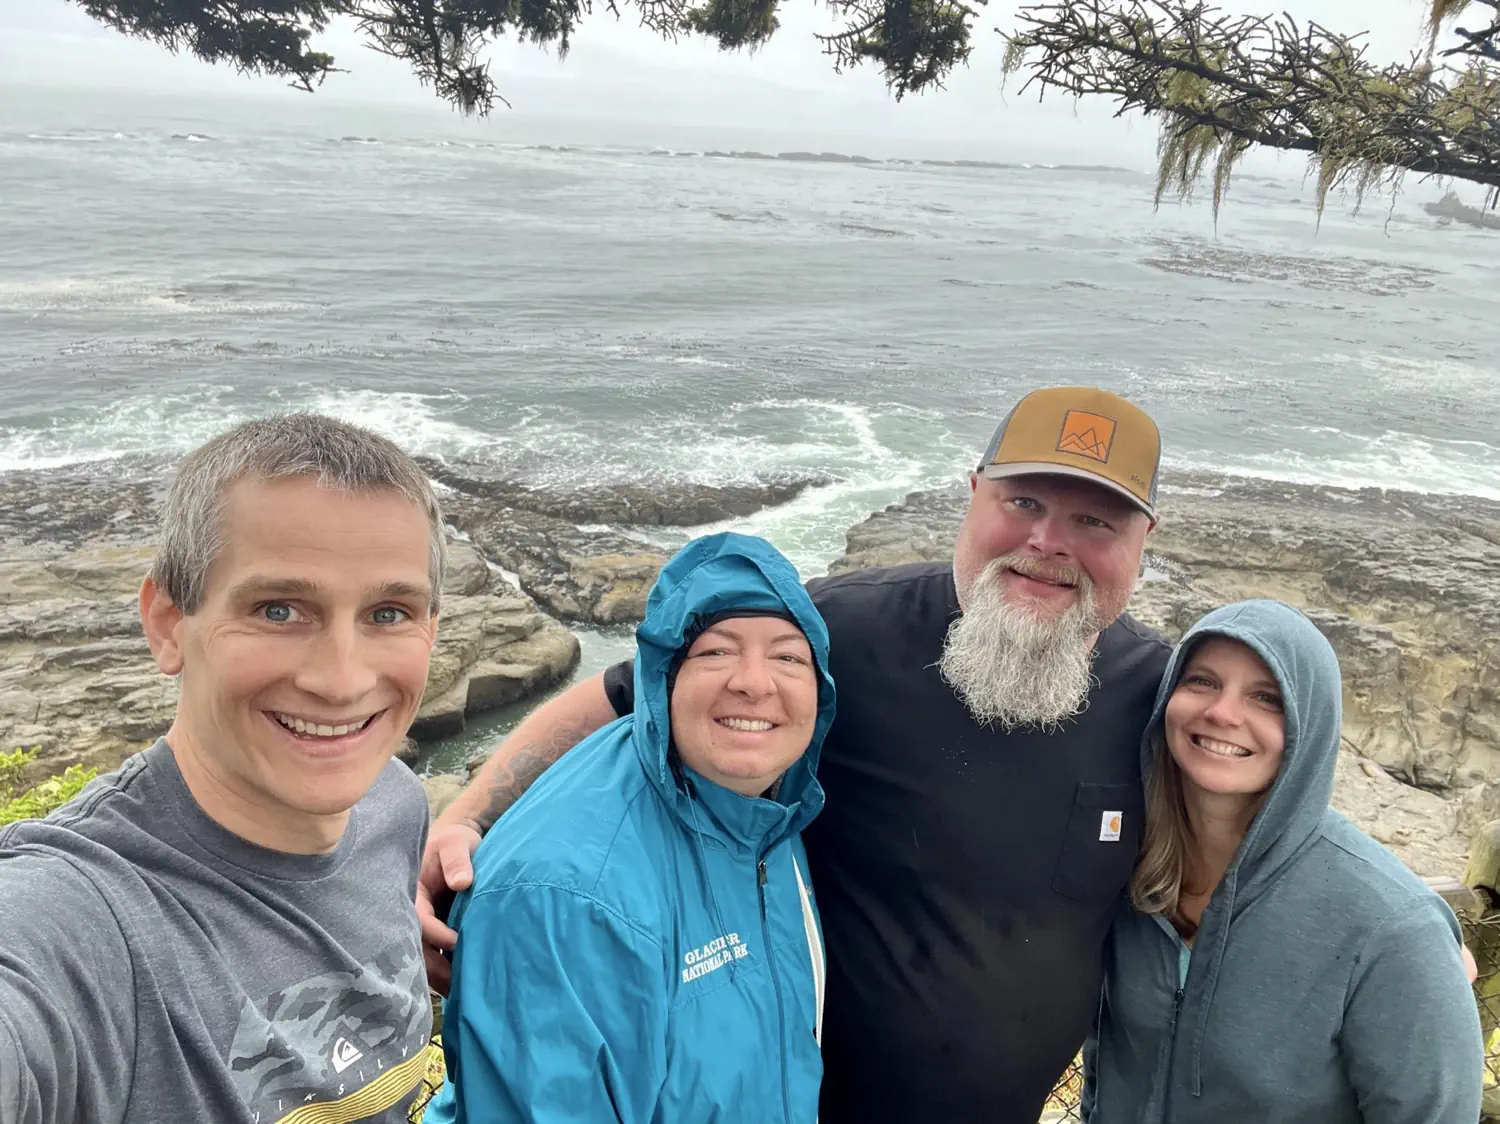 Two-Week Road Trip Through Oregon with Friends: Part 2